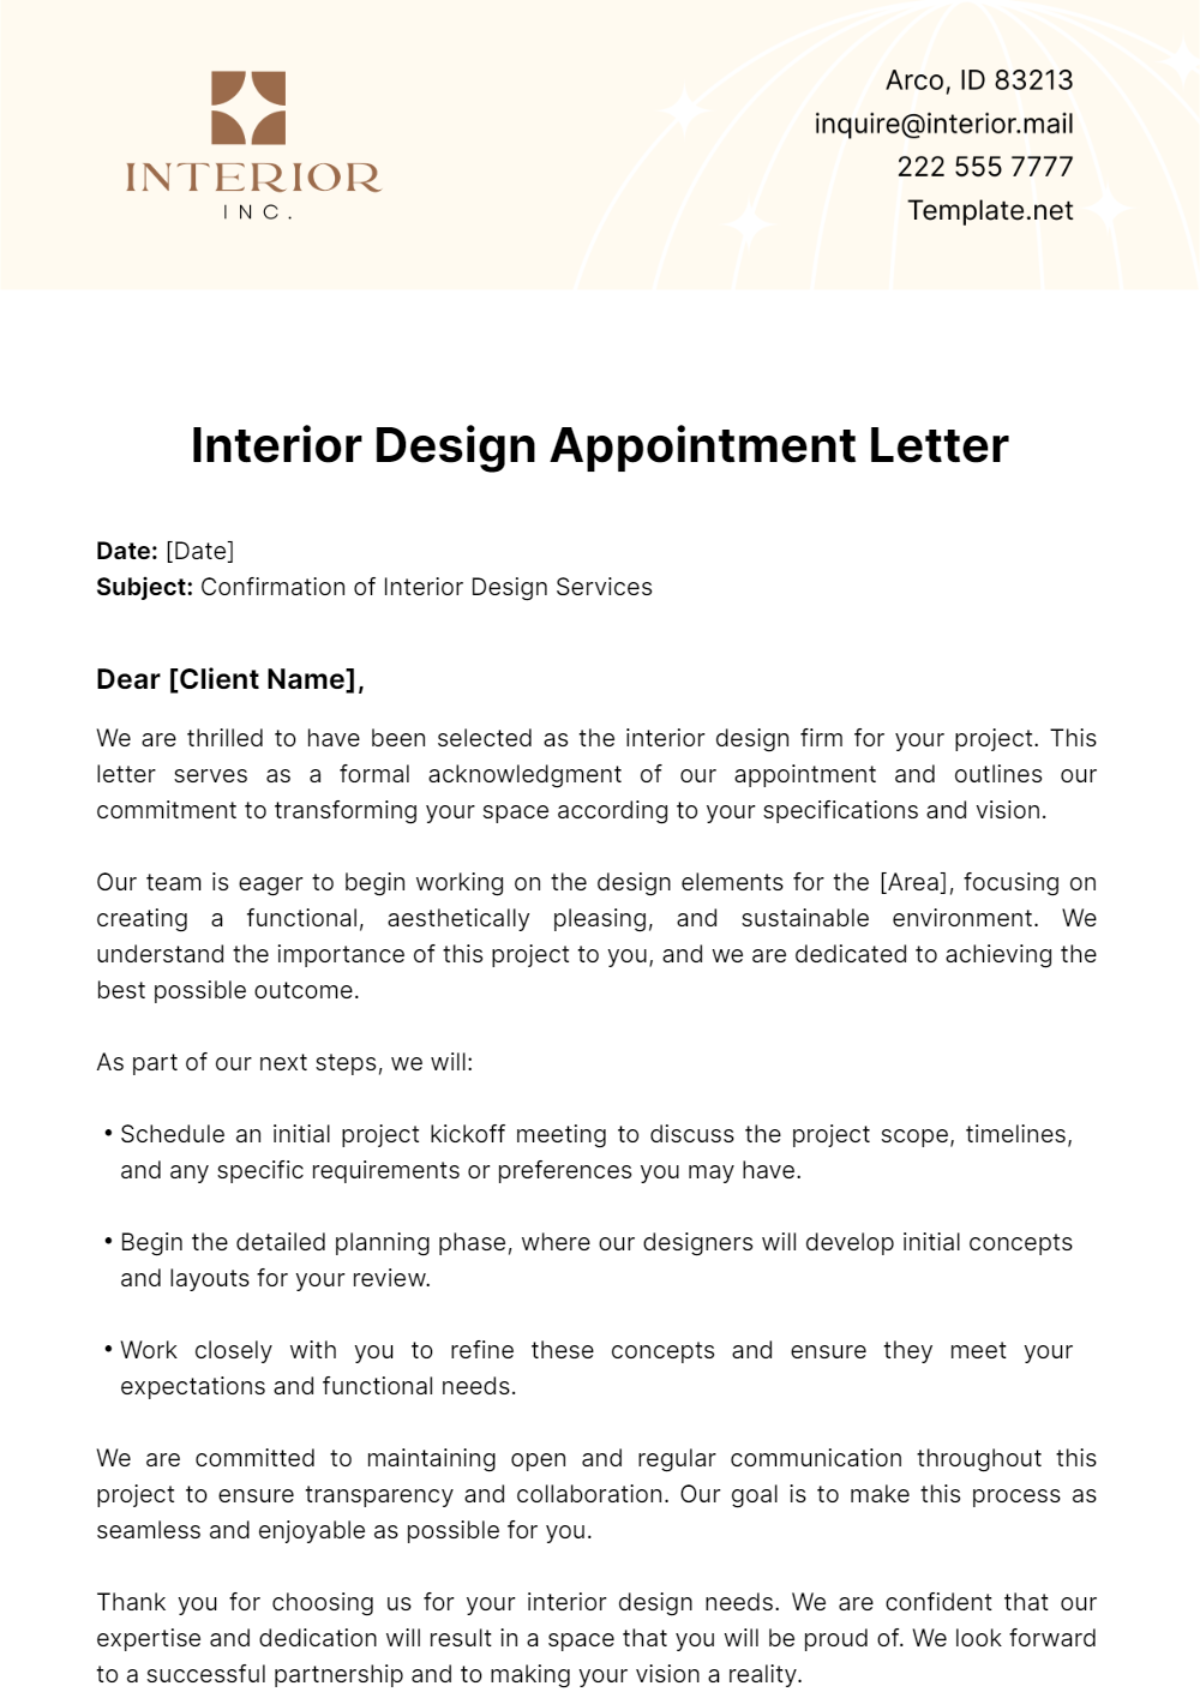 Interior Design Appointment Letter Template